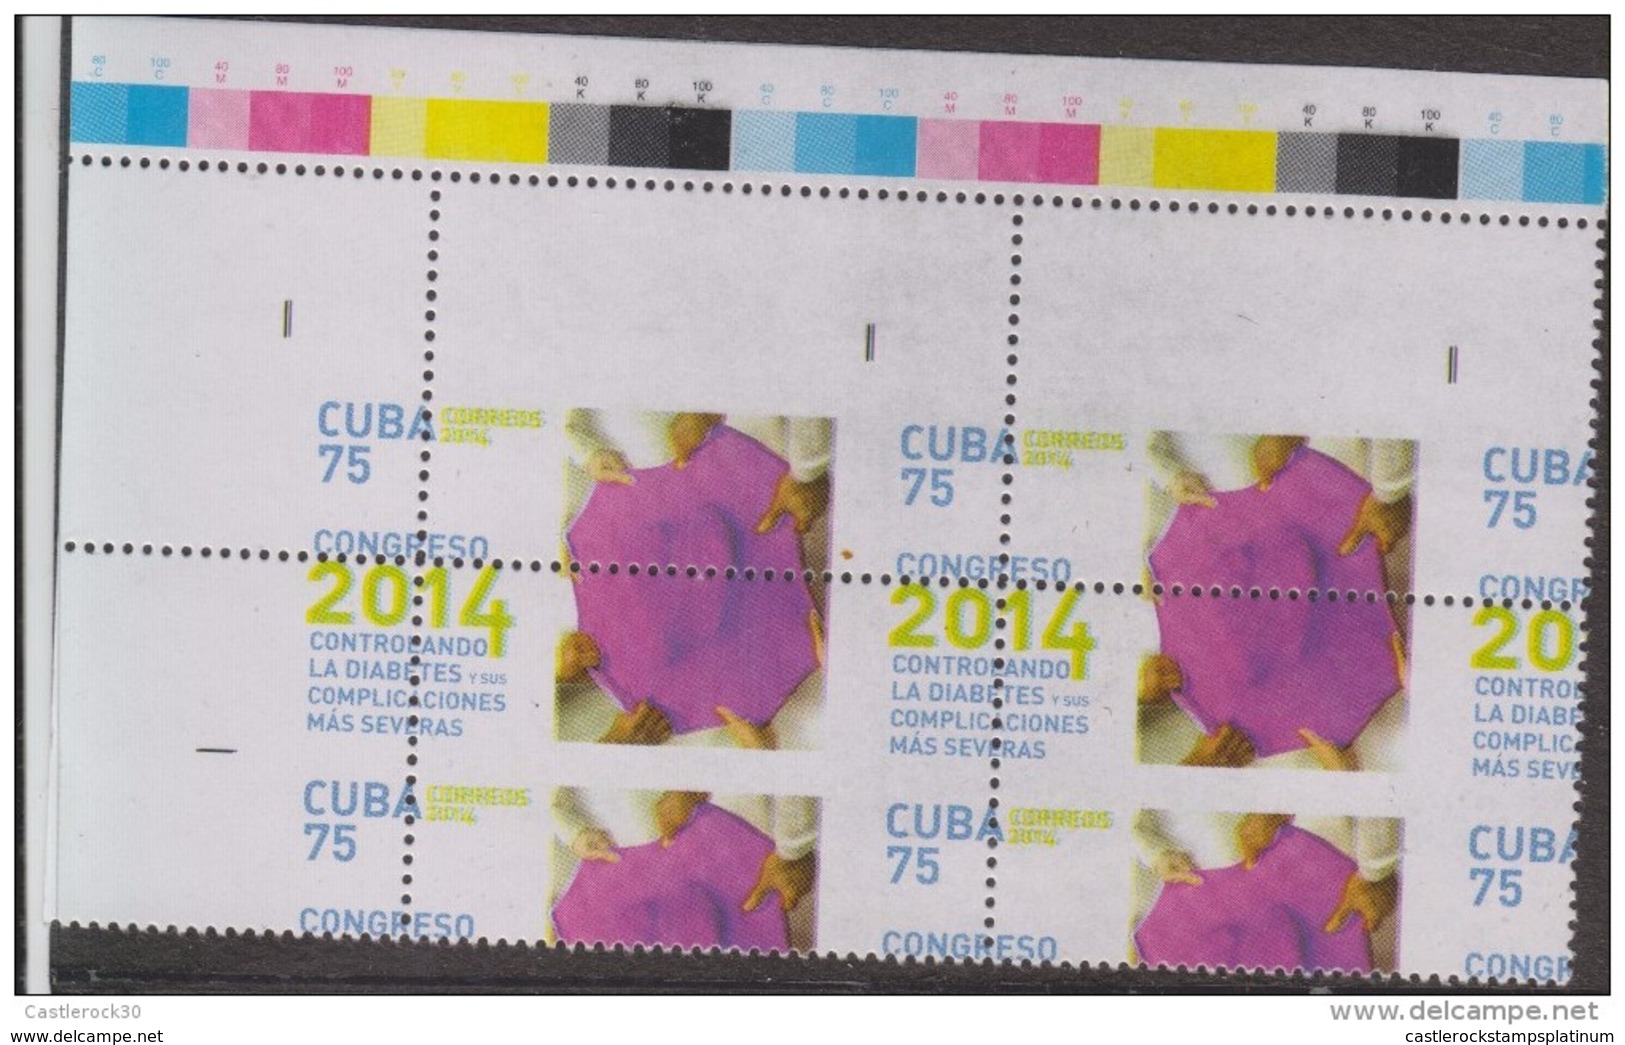 O) 2014 CUBA-CARIBE,SPANISH ANTILLES, ERROR PERFORATED - MEDICINE (IT MAY BE IN A DIFFERENT POSITION FROM PIC), FEET CON - Imperforates, Proofs & Errors